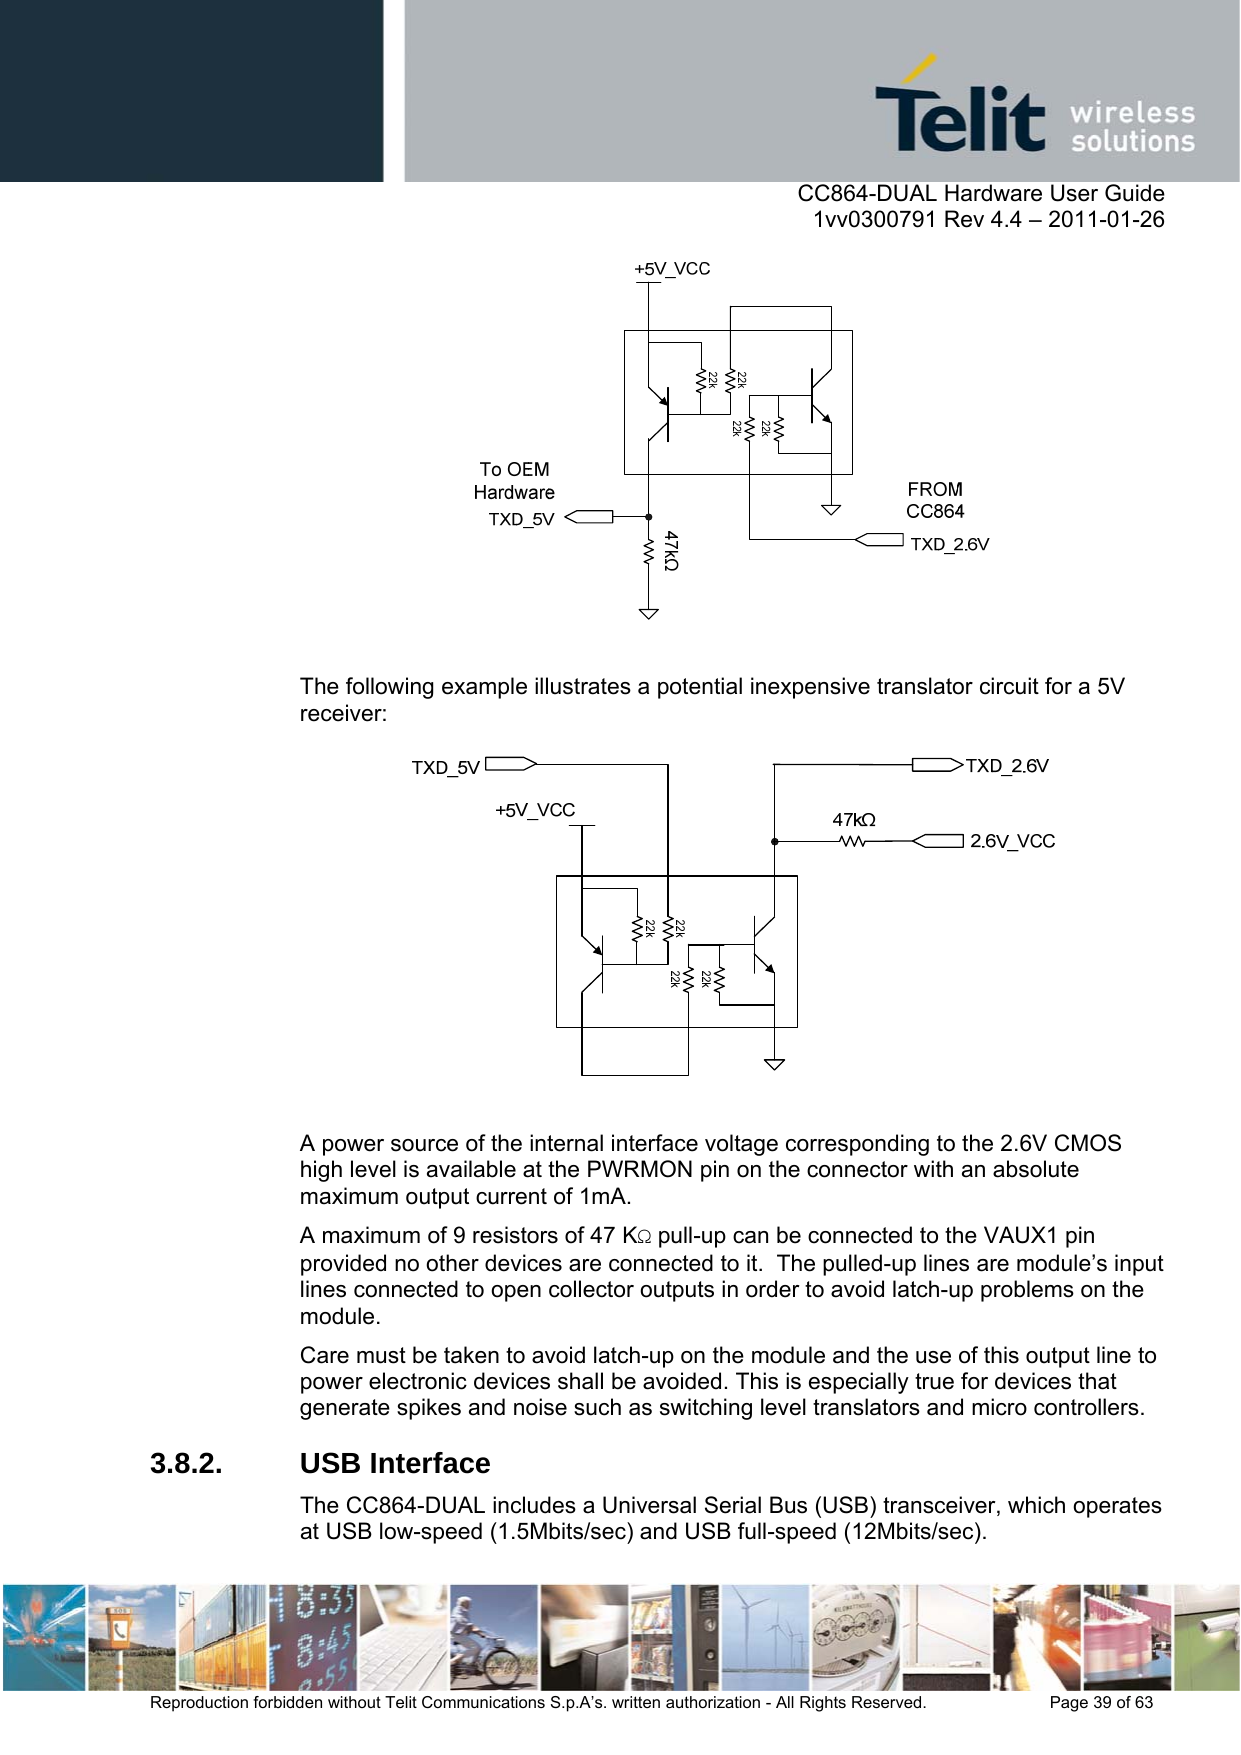      CC864-DUAL Hardware User Guide    1vv0300791 Rev 4.4 – 2011-01-26  Reproduction forbidden without Telit Communications S.p.A’s. written authorization - All Rights Reserved.    Page 39 of 63    The following example illustrates a potential inexpensive translator circuit for a 5V receiver:   A power source of the internal interface voltage corresponding to the 2.6V CMOS high level is available at the PWRMON pin on the connector with an absolute maximum output current of 1mA. A maximum of 9 resistors of 47 KΩ pull-up can be connected to the VAUX1 pin provided no other devices are connected to it.  The pulled-up lines are module’s input lines connected to open collector outputs in order to avoid latch-up problems on the module. Care must be taken to avoid latch-up on the module and the use of this output line to power electronic devices shall be avoided. This is especially true for devices that generate spikes and noise such as switching level translators and micro controllers. 3.8.2. USB Interface The CC864-DUAL includes a Universal Serial Bus (USB) transceiver, which operates at USB low-speed (1.5Mbits/sec) and USB full-speed (12Mbits/sec).  